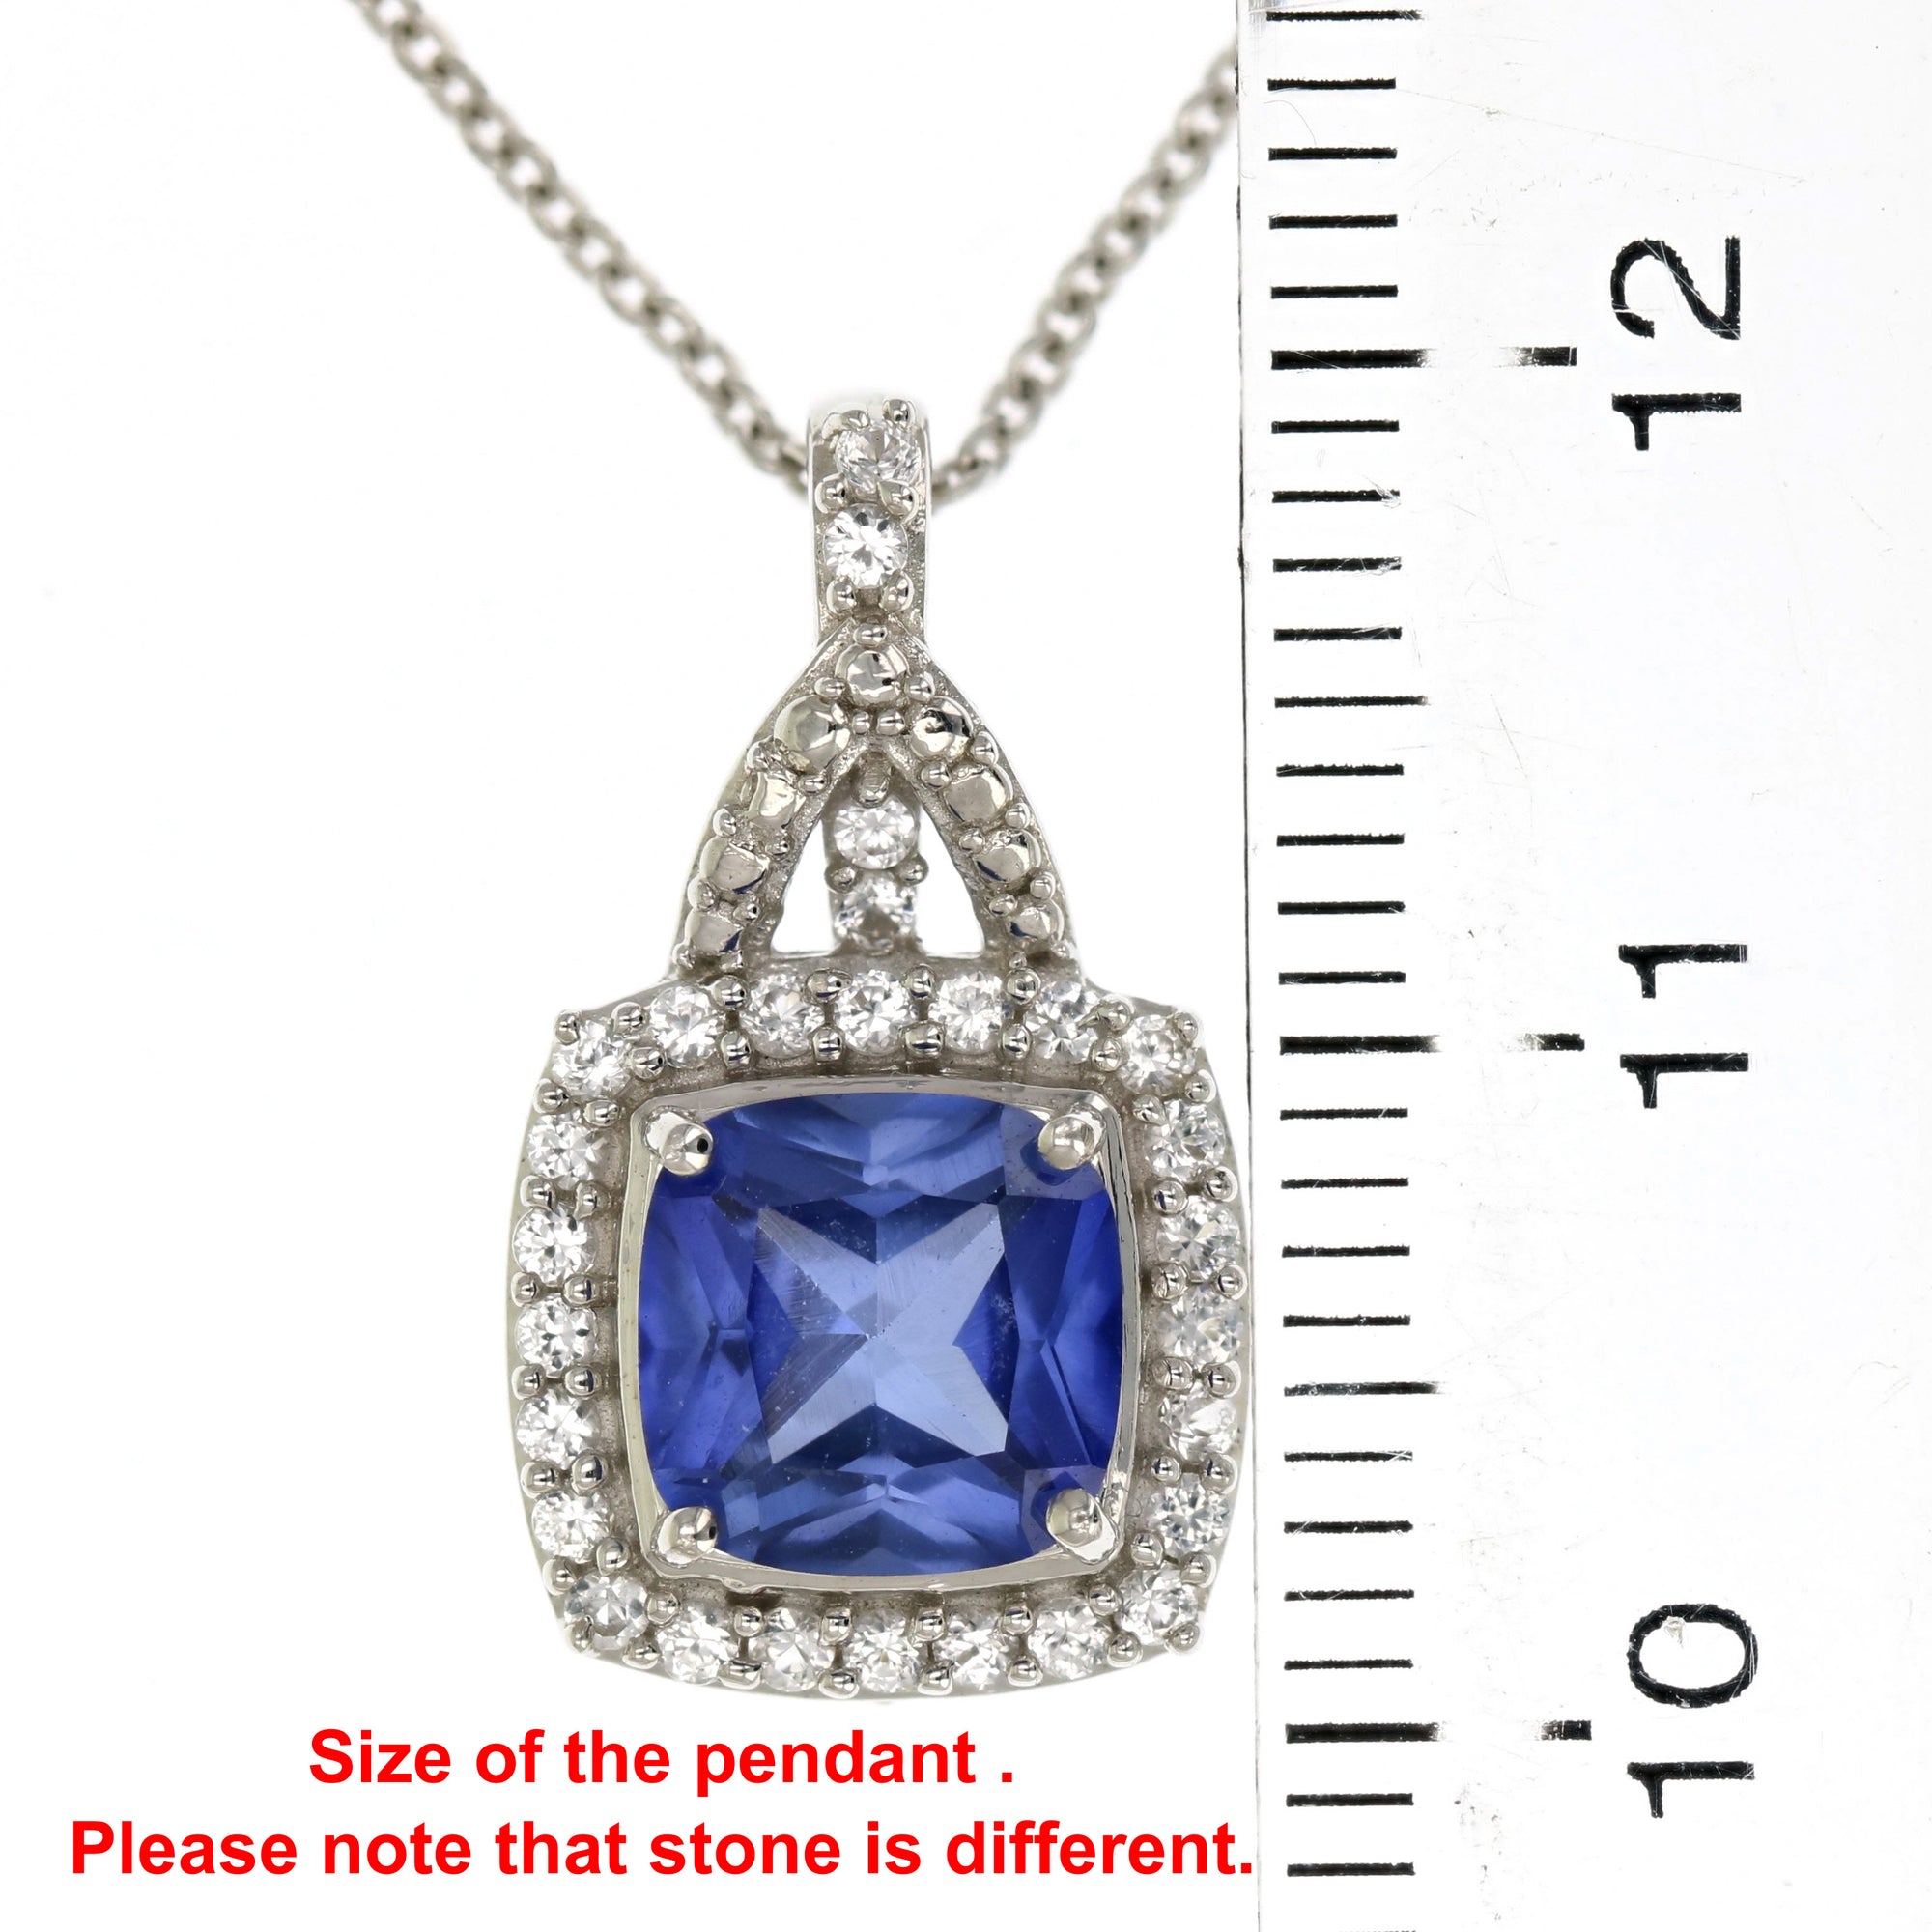 1.50 cttw Cushion Cut Created Opal Pendant .925 Sterling Silver with Chain